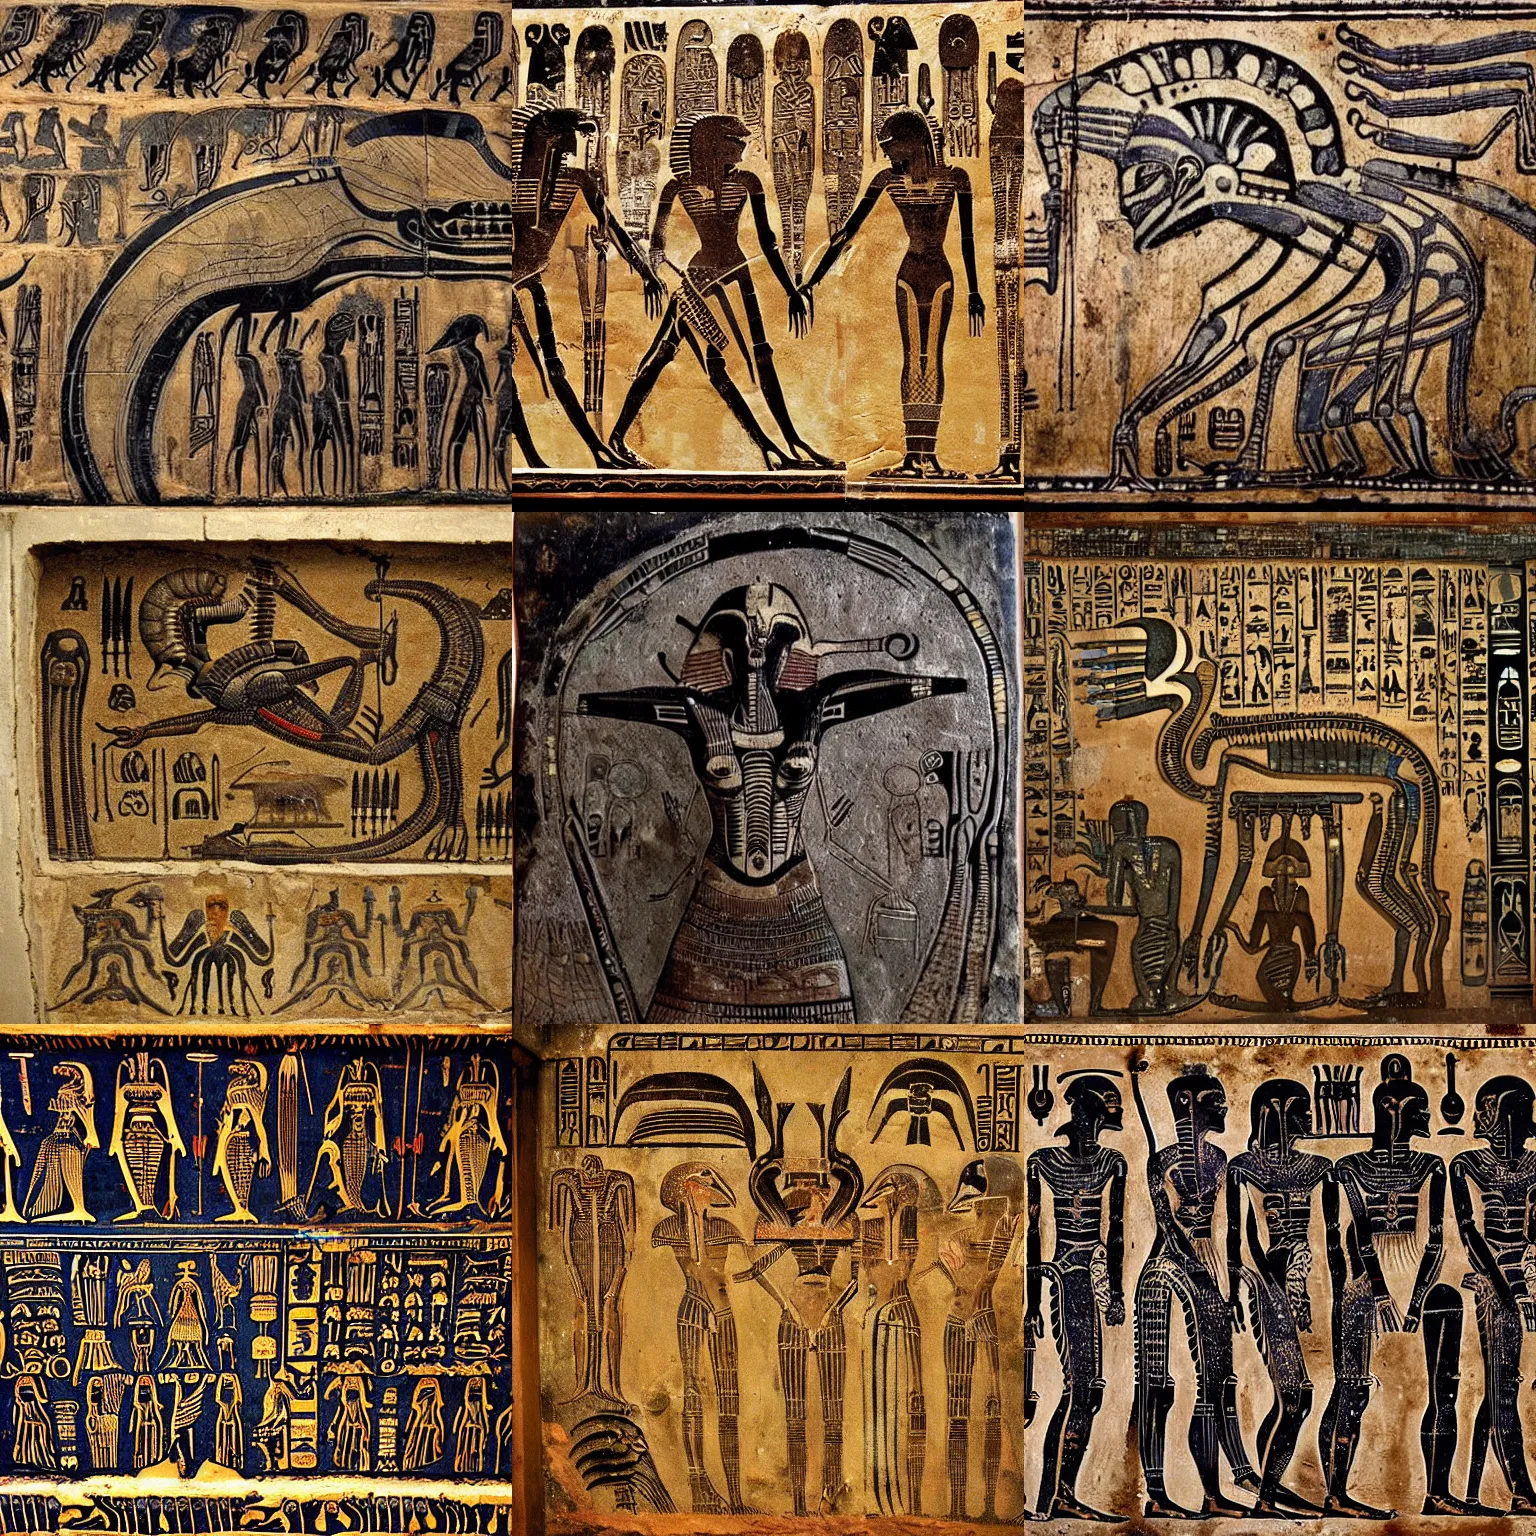 Prompt: [ xenomorph ] [ giger ] [ alien ] from movie aliens painted on highly intricate ancient egyptian mural art, with many organized hieroglyphs